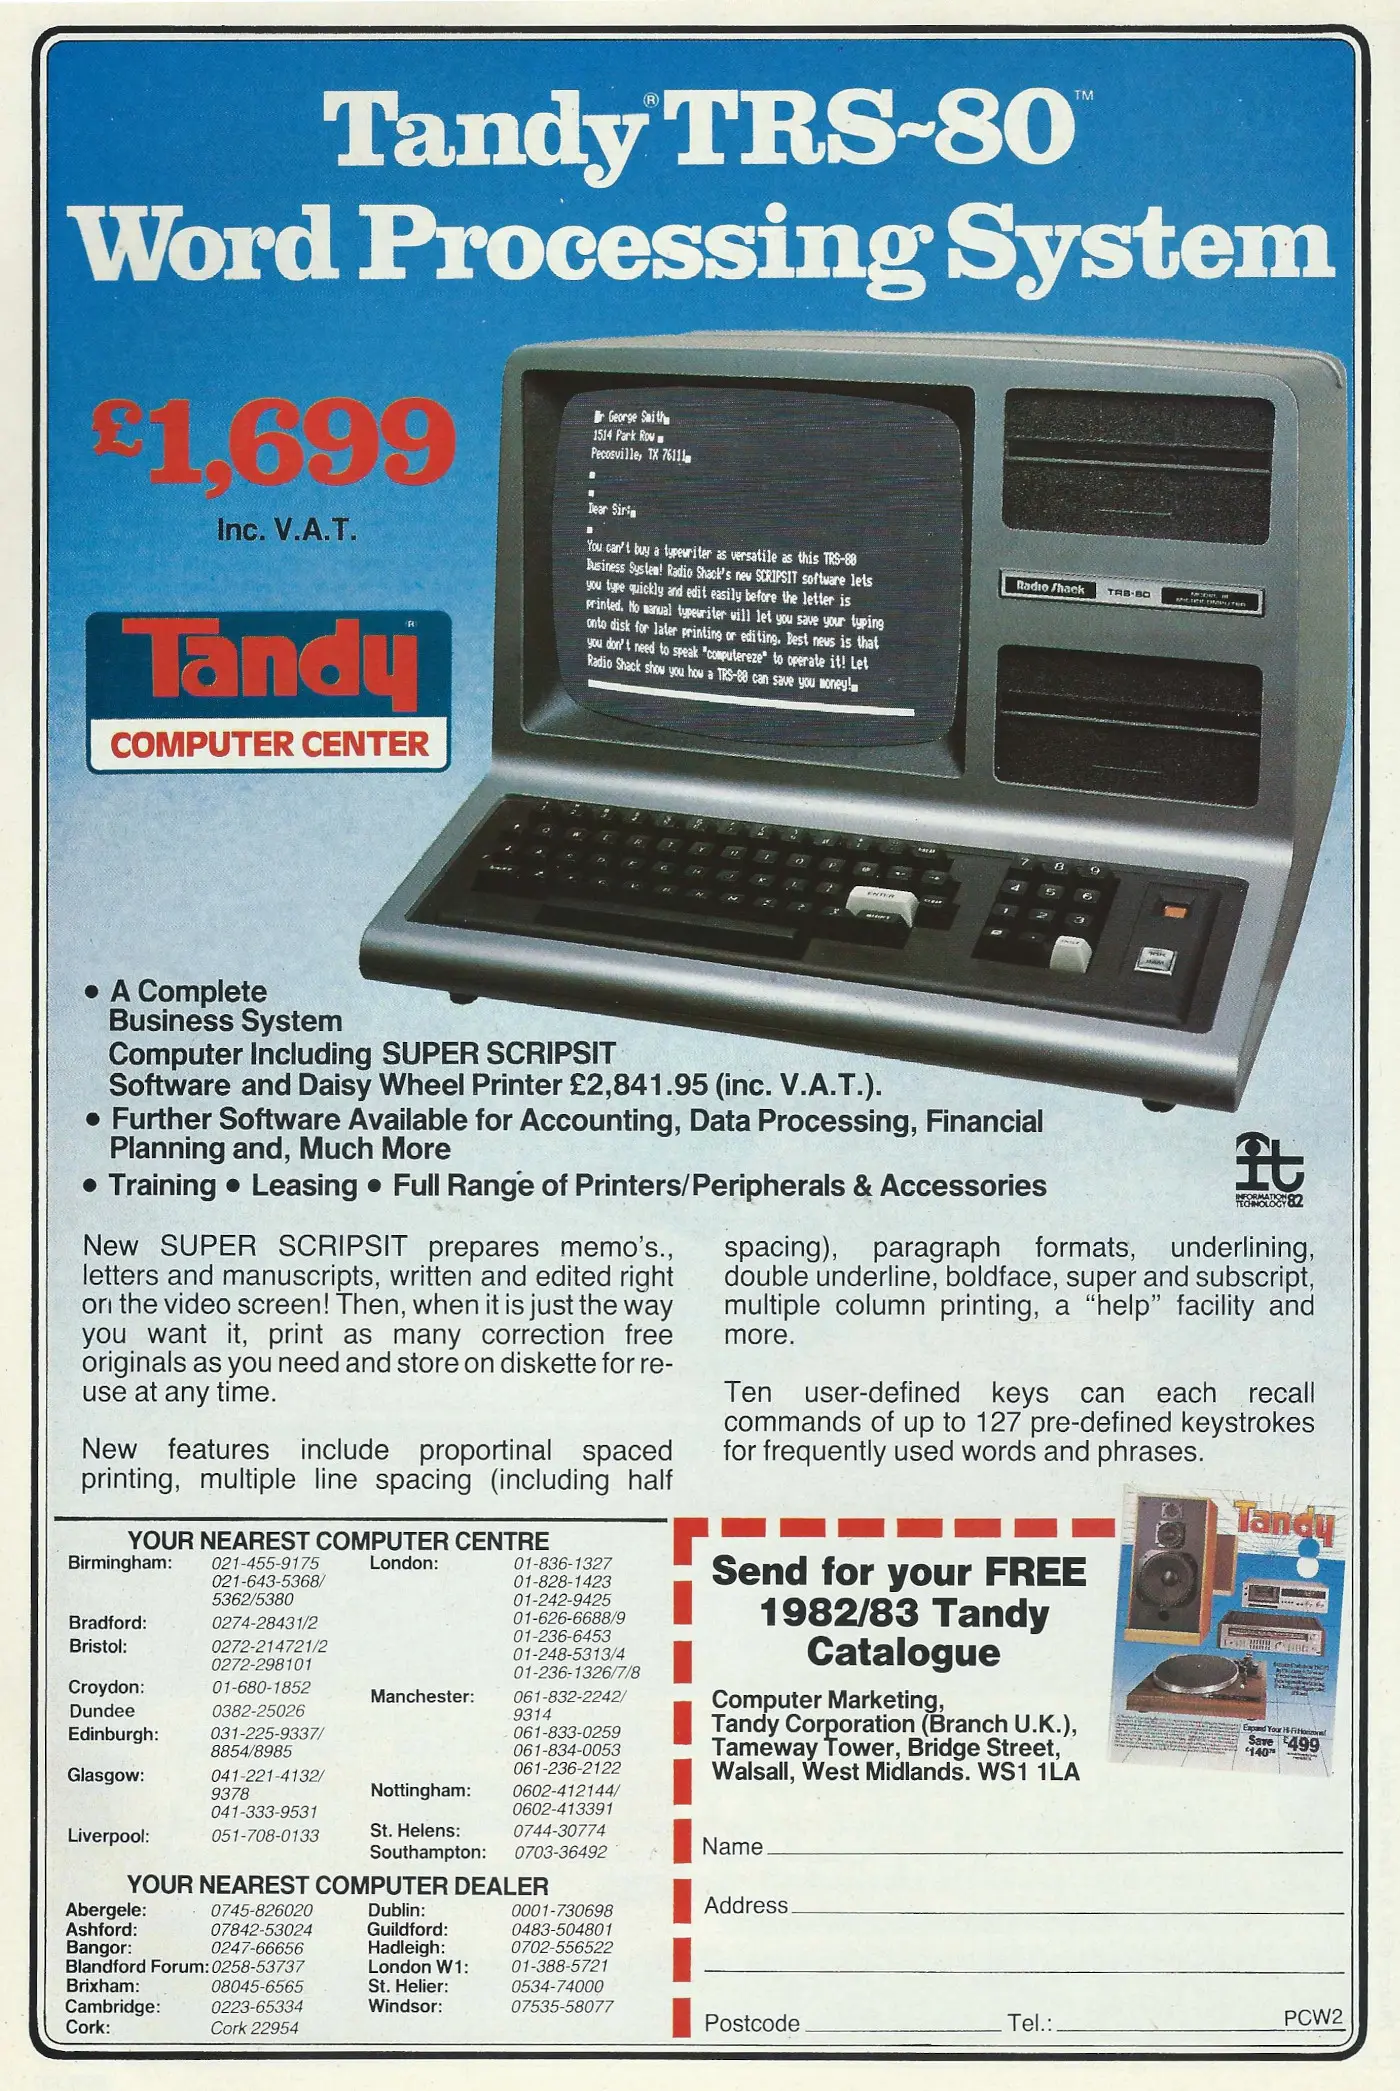 Tandy/Radio Shack Advert: Tandy TRS-80 Word Processing System, from Personal Computer World, November 1982